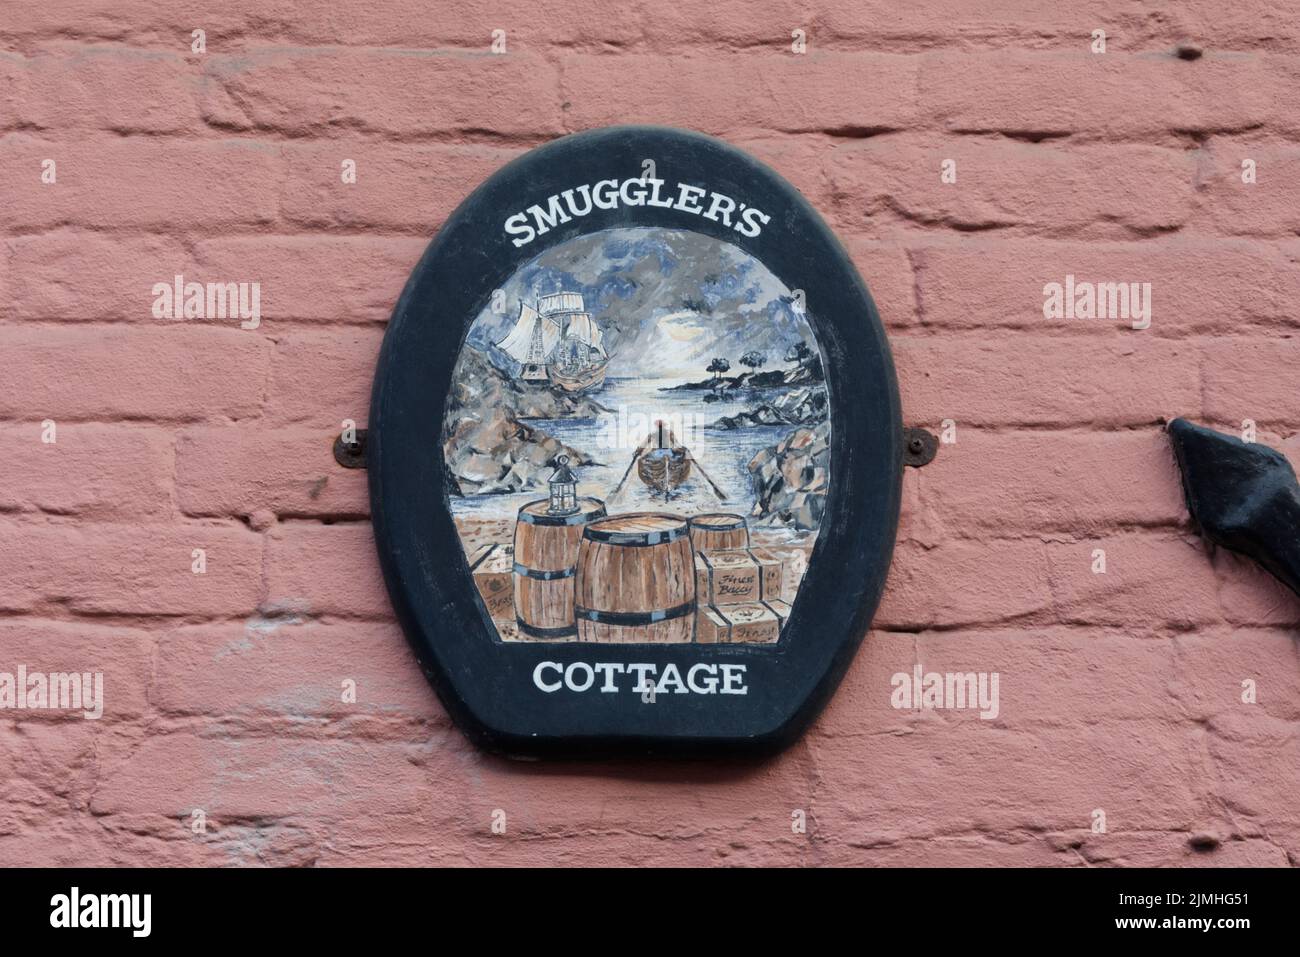 smugglers cottage sign on a pink wall Stock Photo